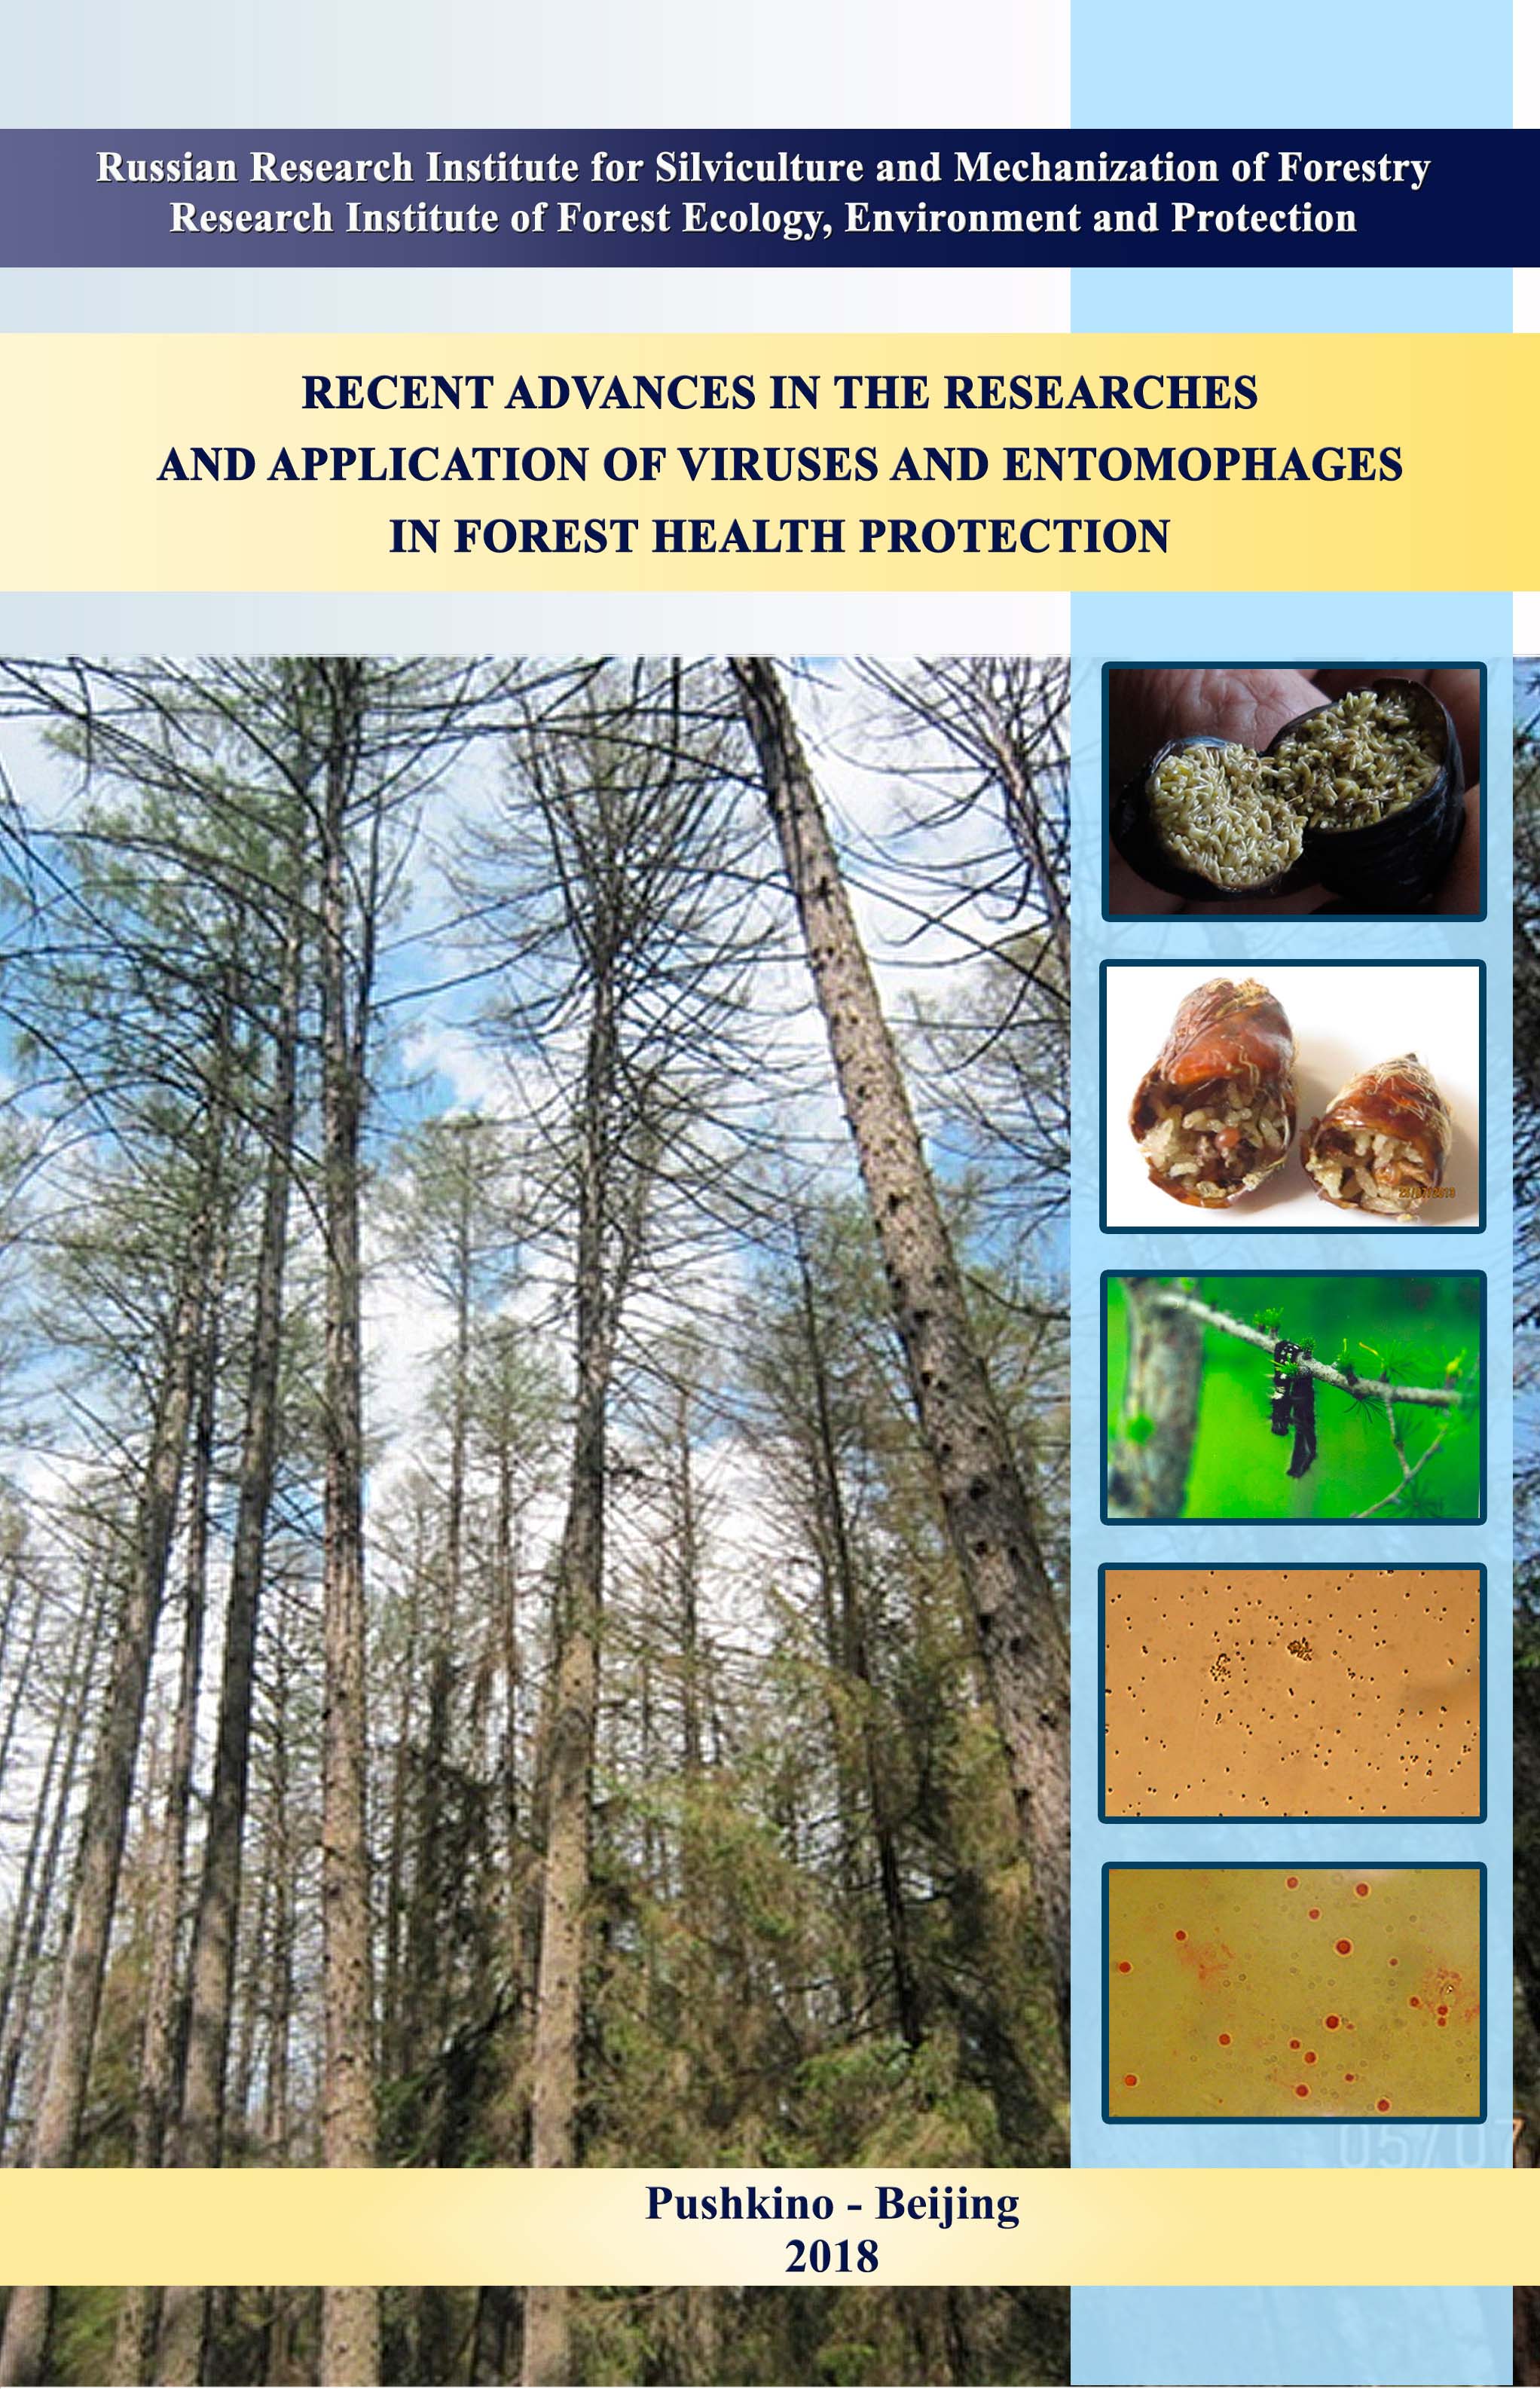 Recent advances in the researches and application of viruses in forest health protection and entomophages